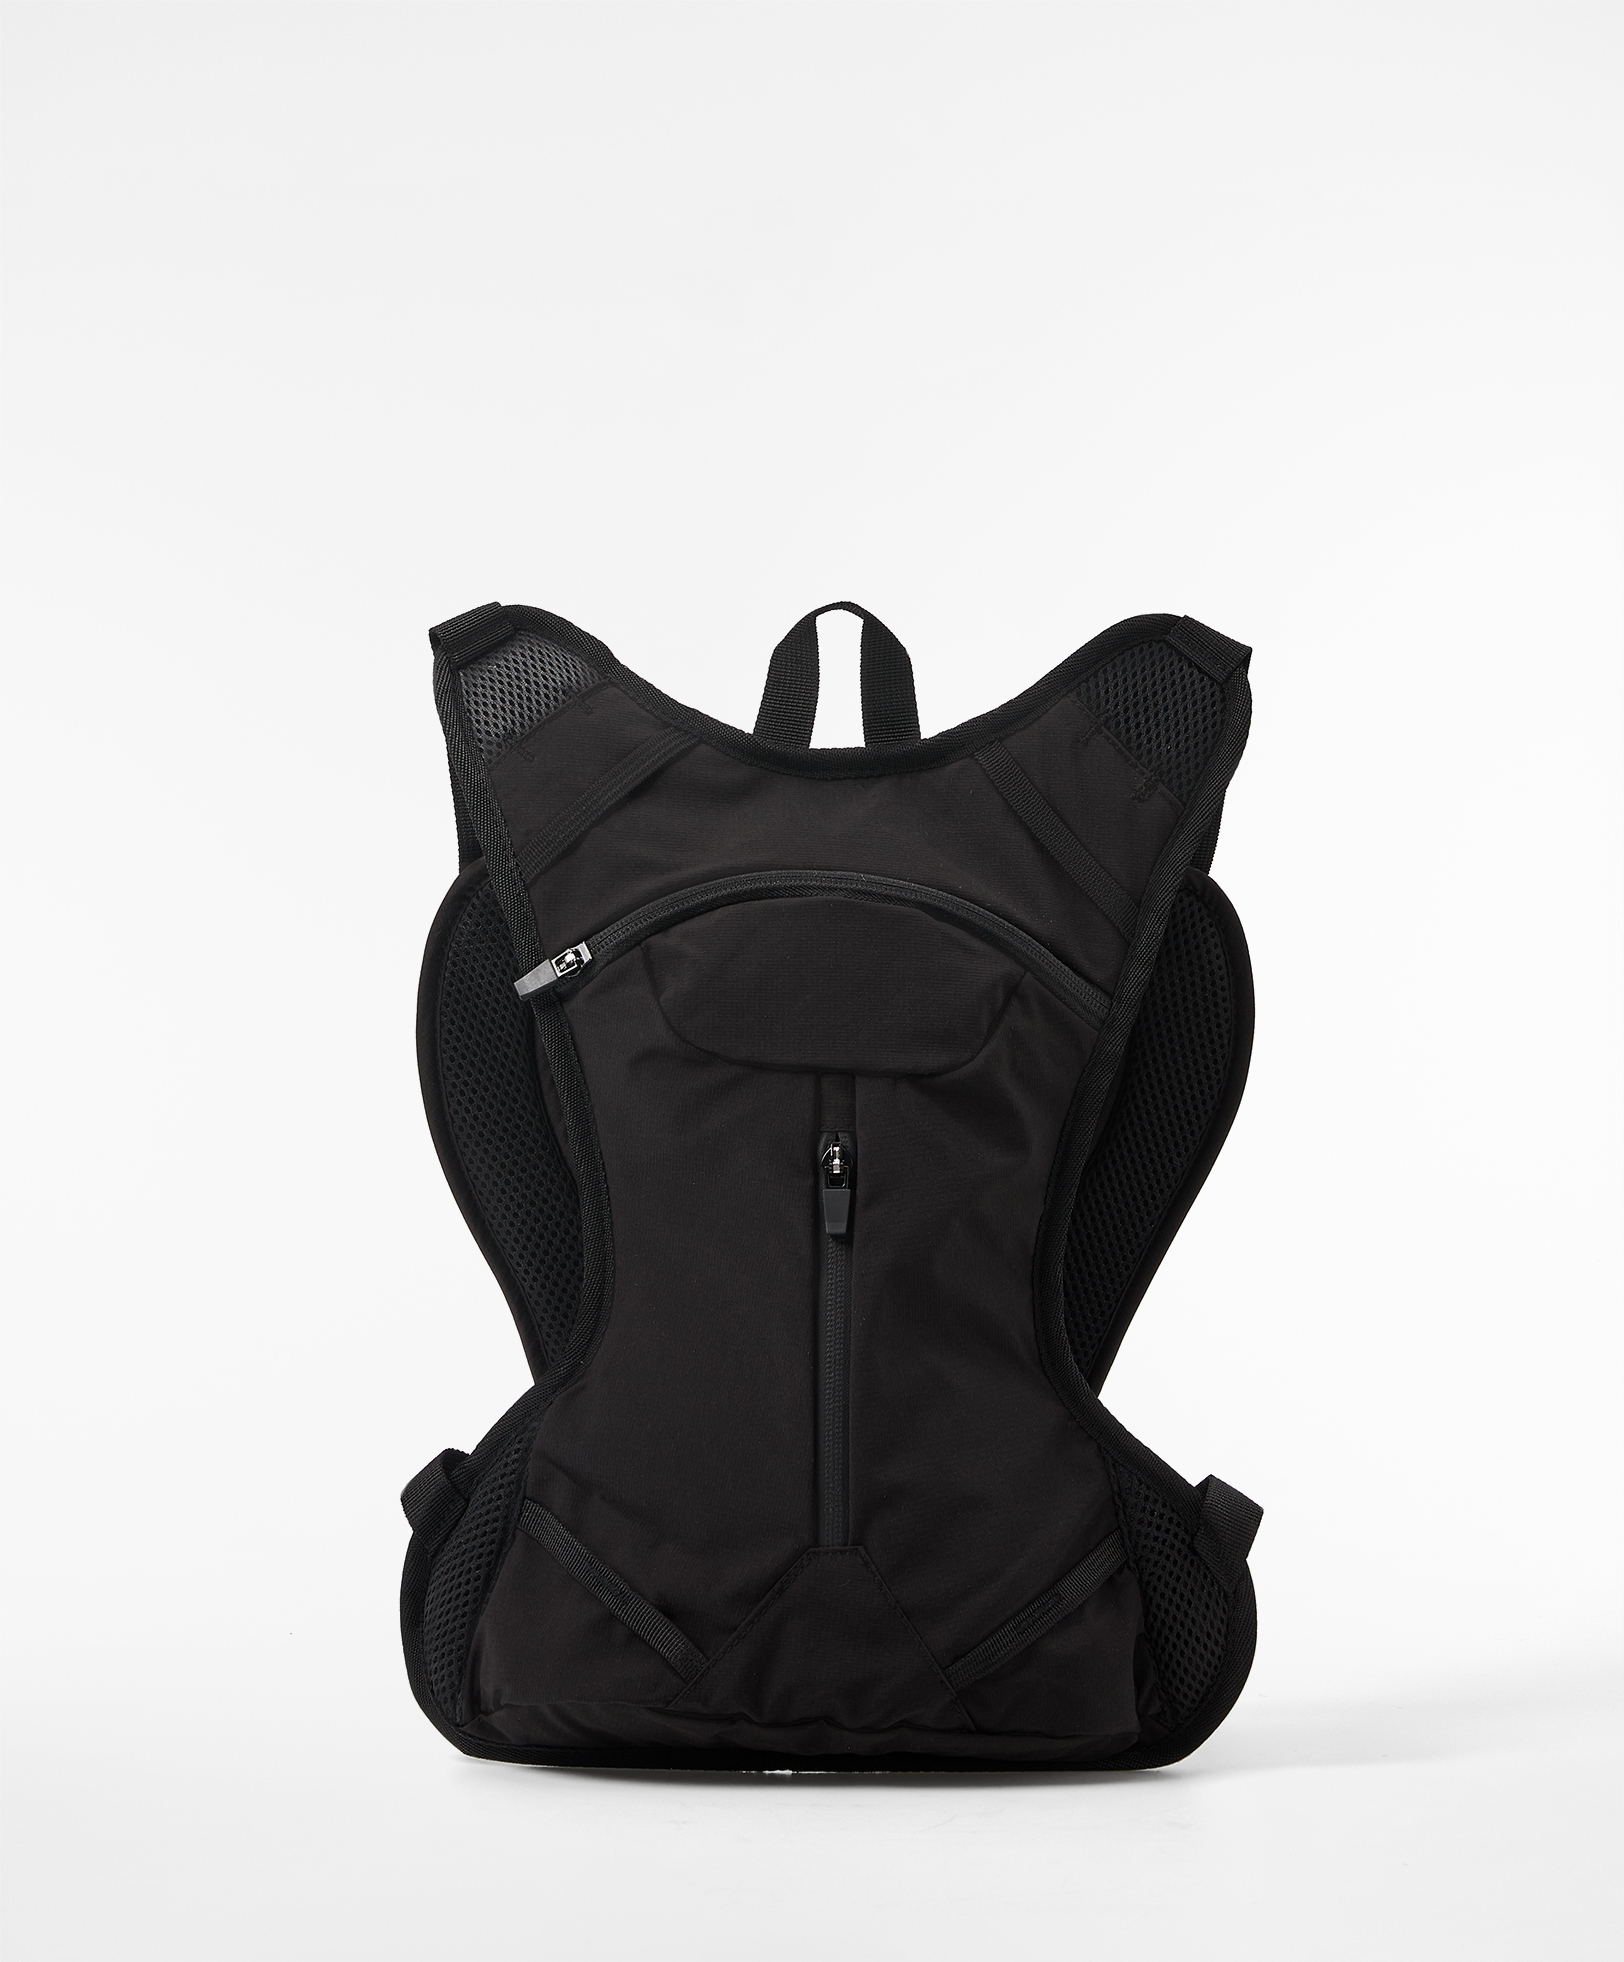 Compact backpack